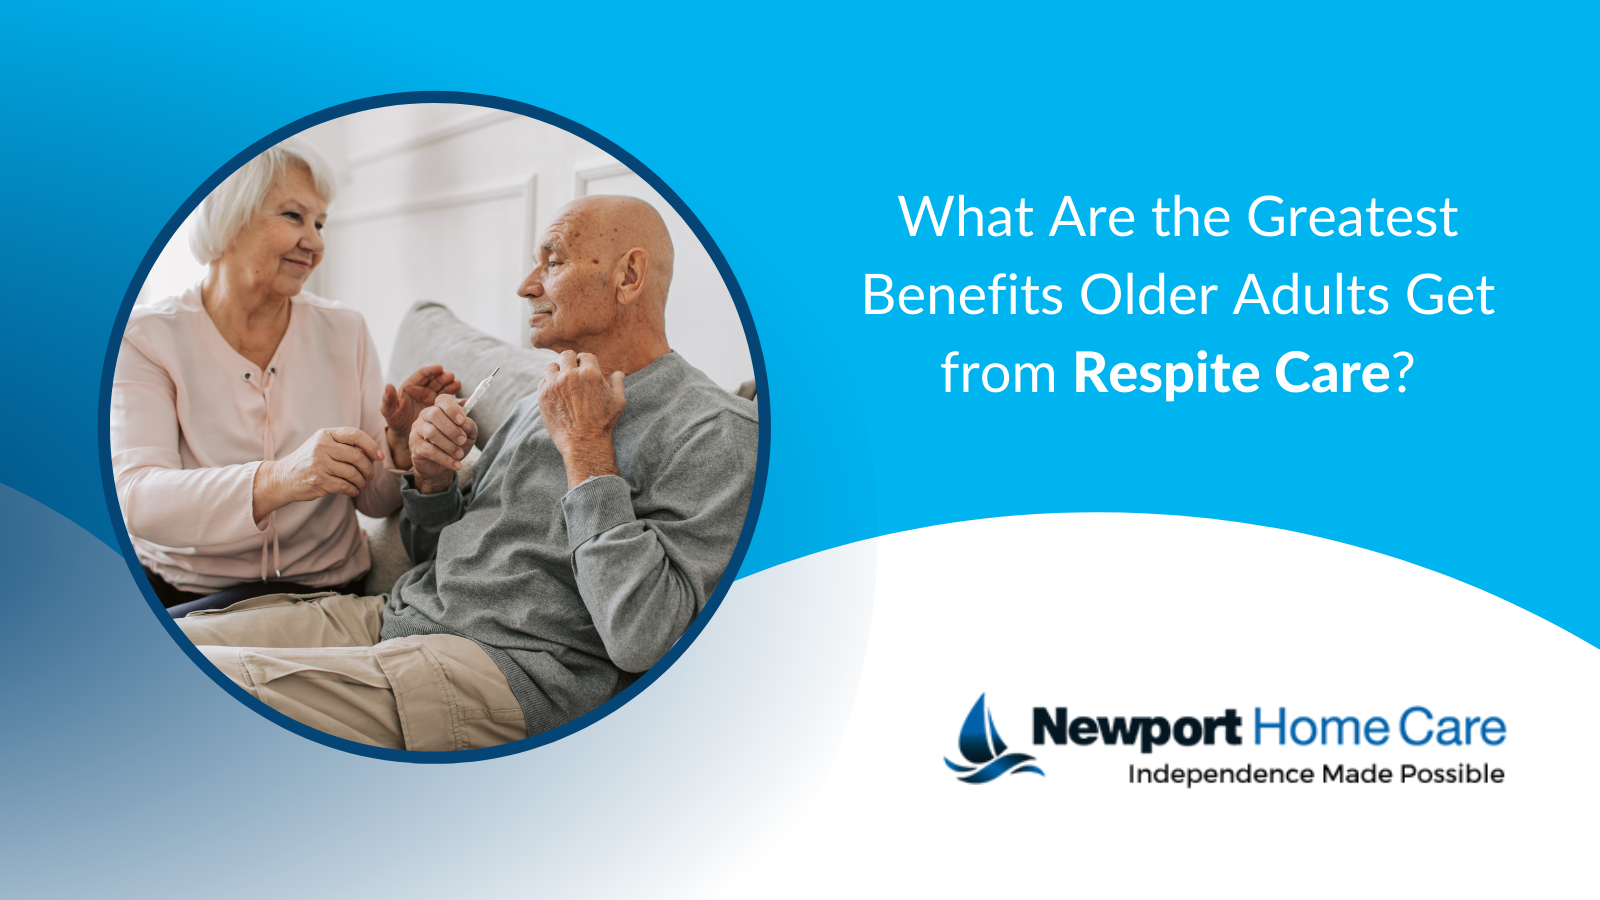 What Are the Greatest Benefits Older Adults Get from Respite Care